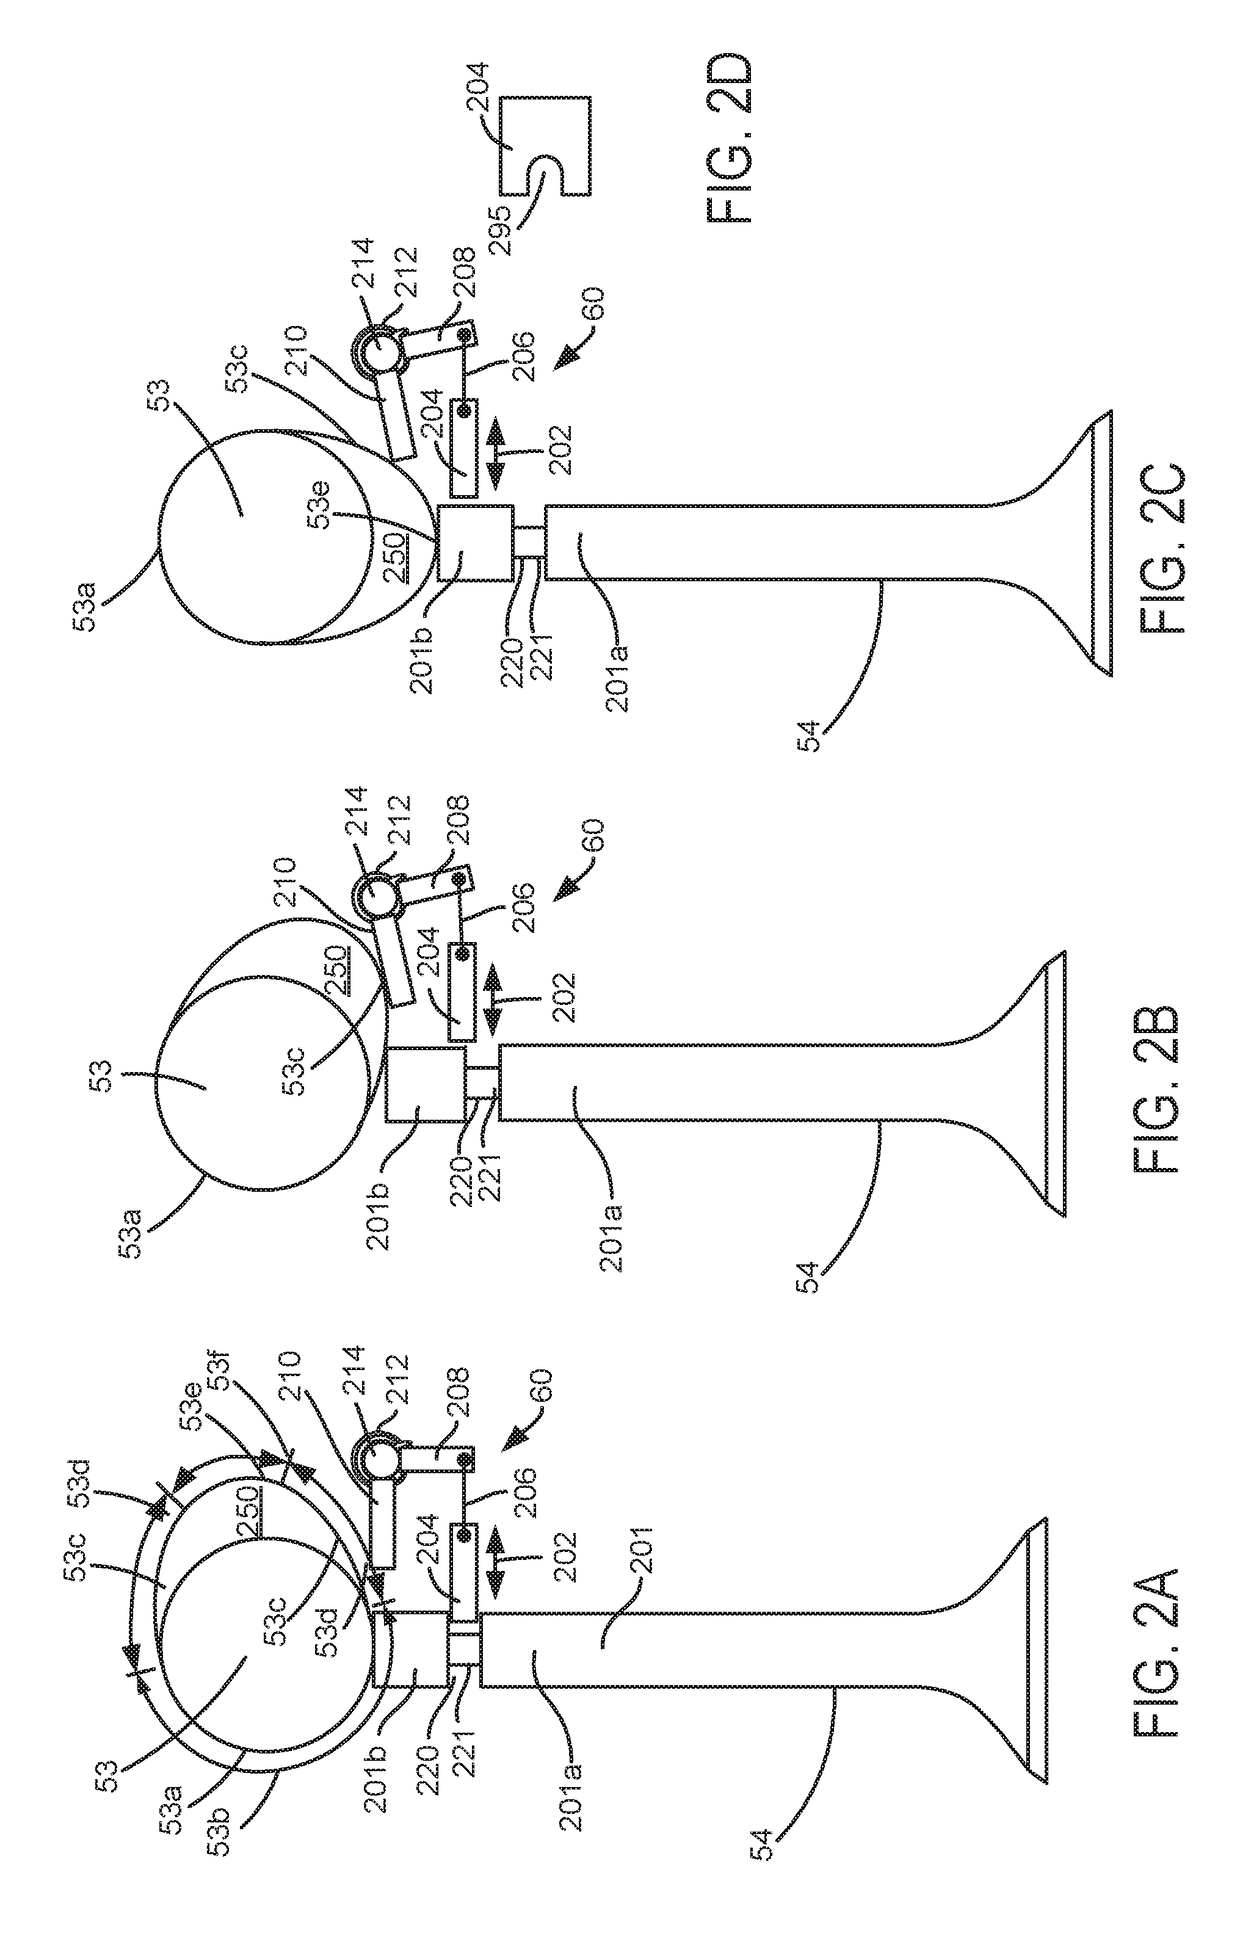 Methods and system for operating an exhaust valve of an internal combustion engine